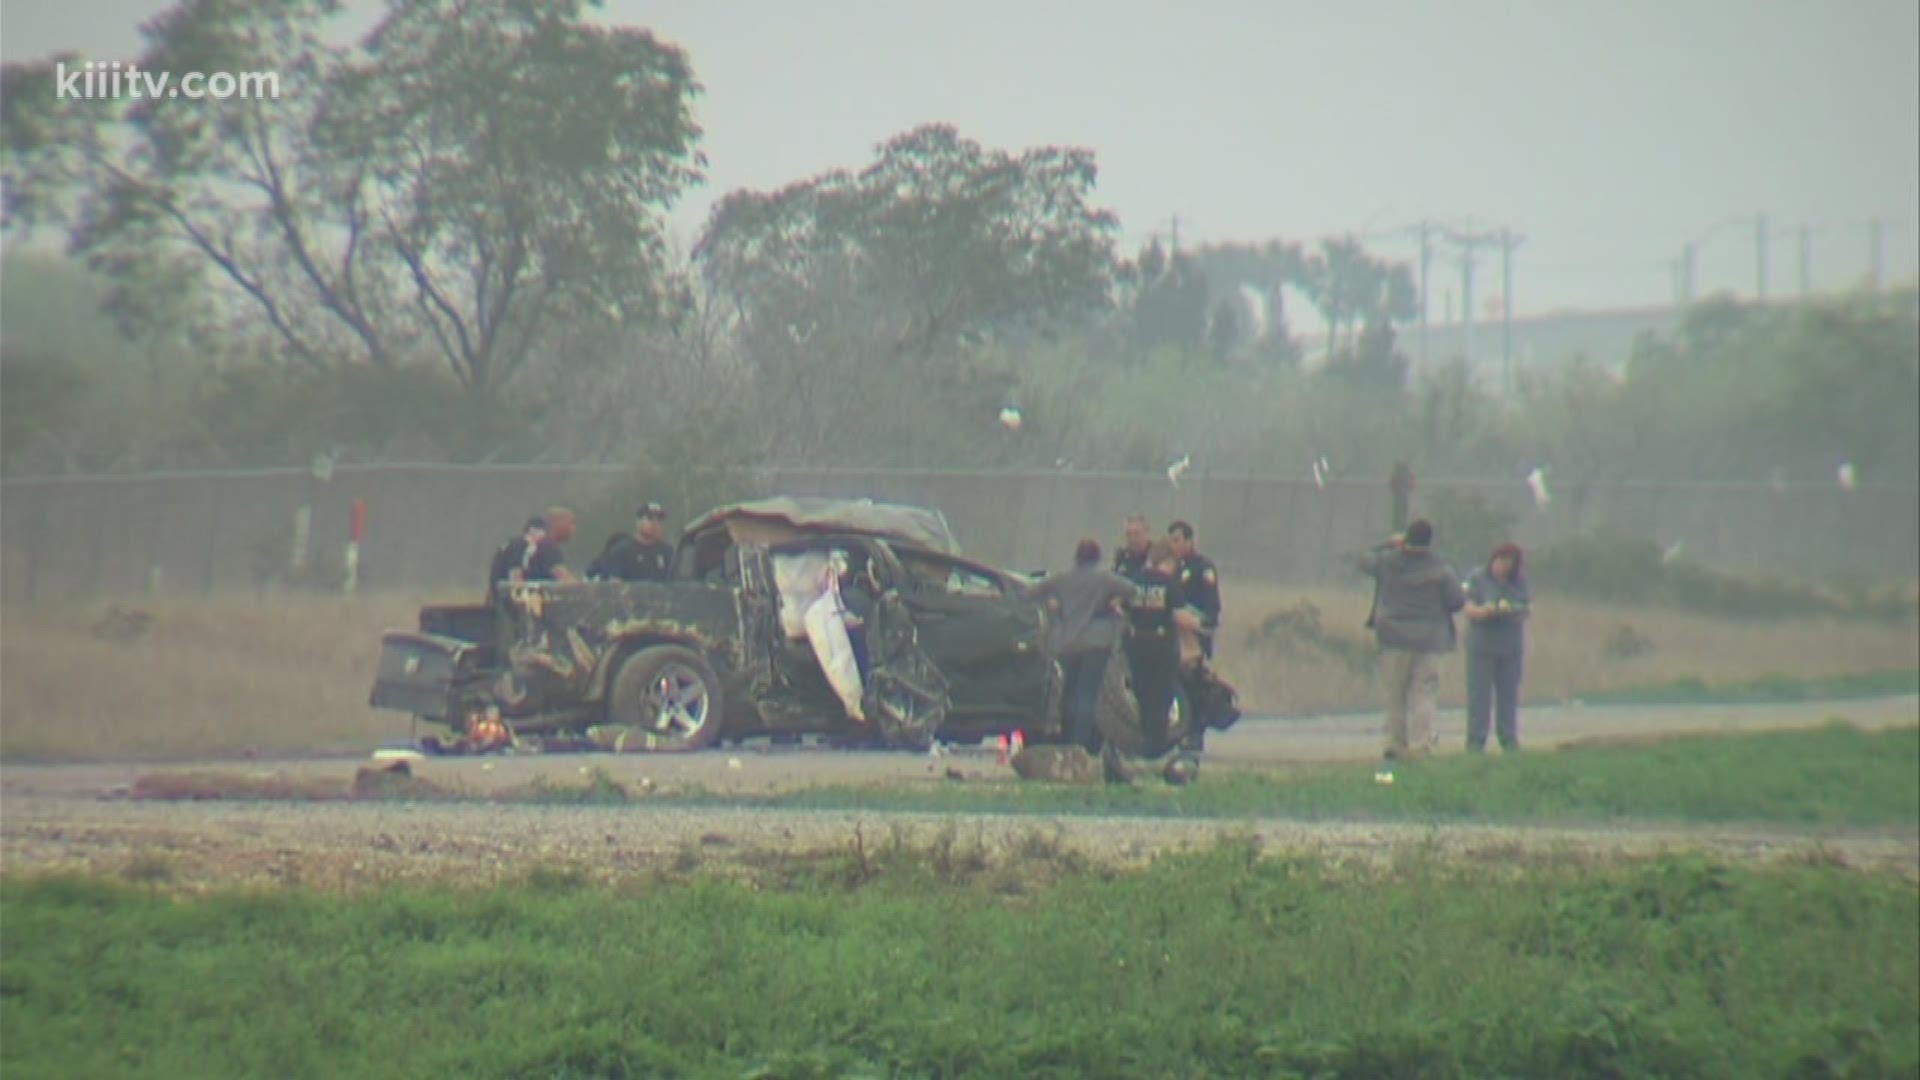 ccording to authorities, the driver left the scene of the accident and walked at least 3 miles to a Whataburger where he was found by police.